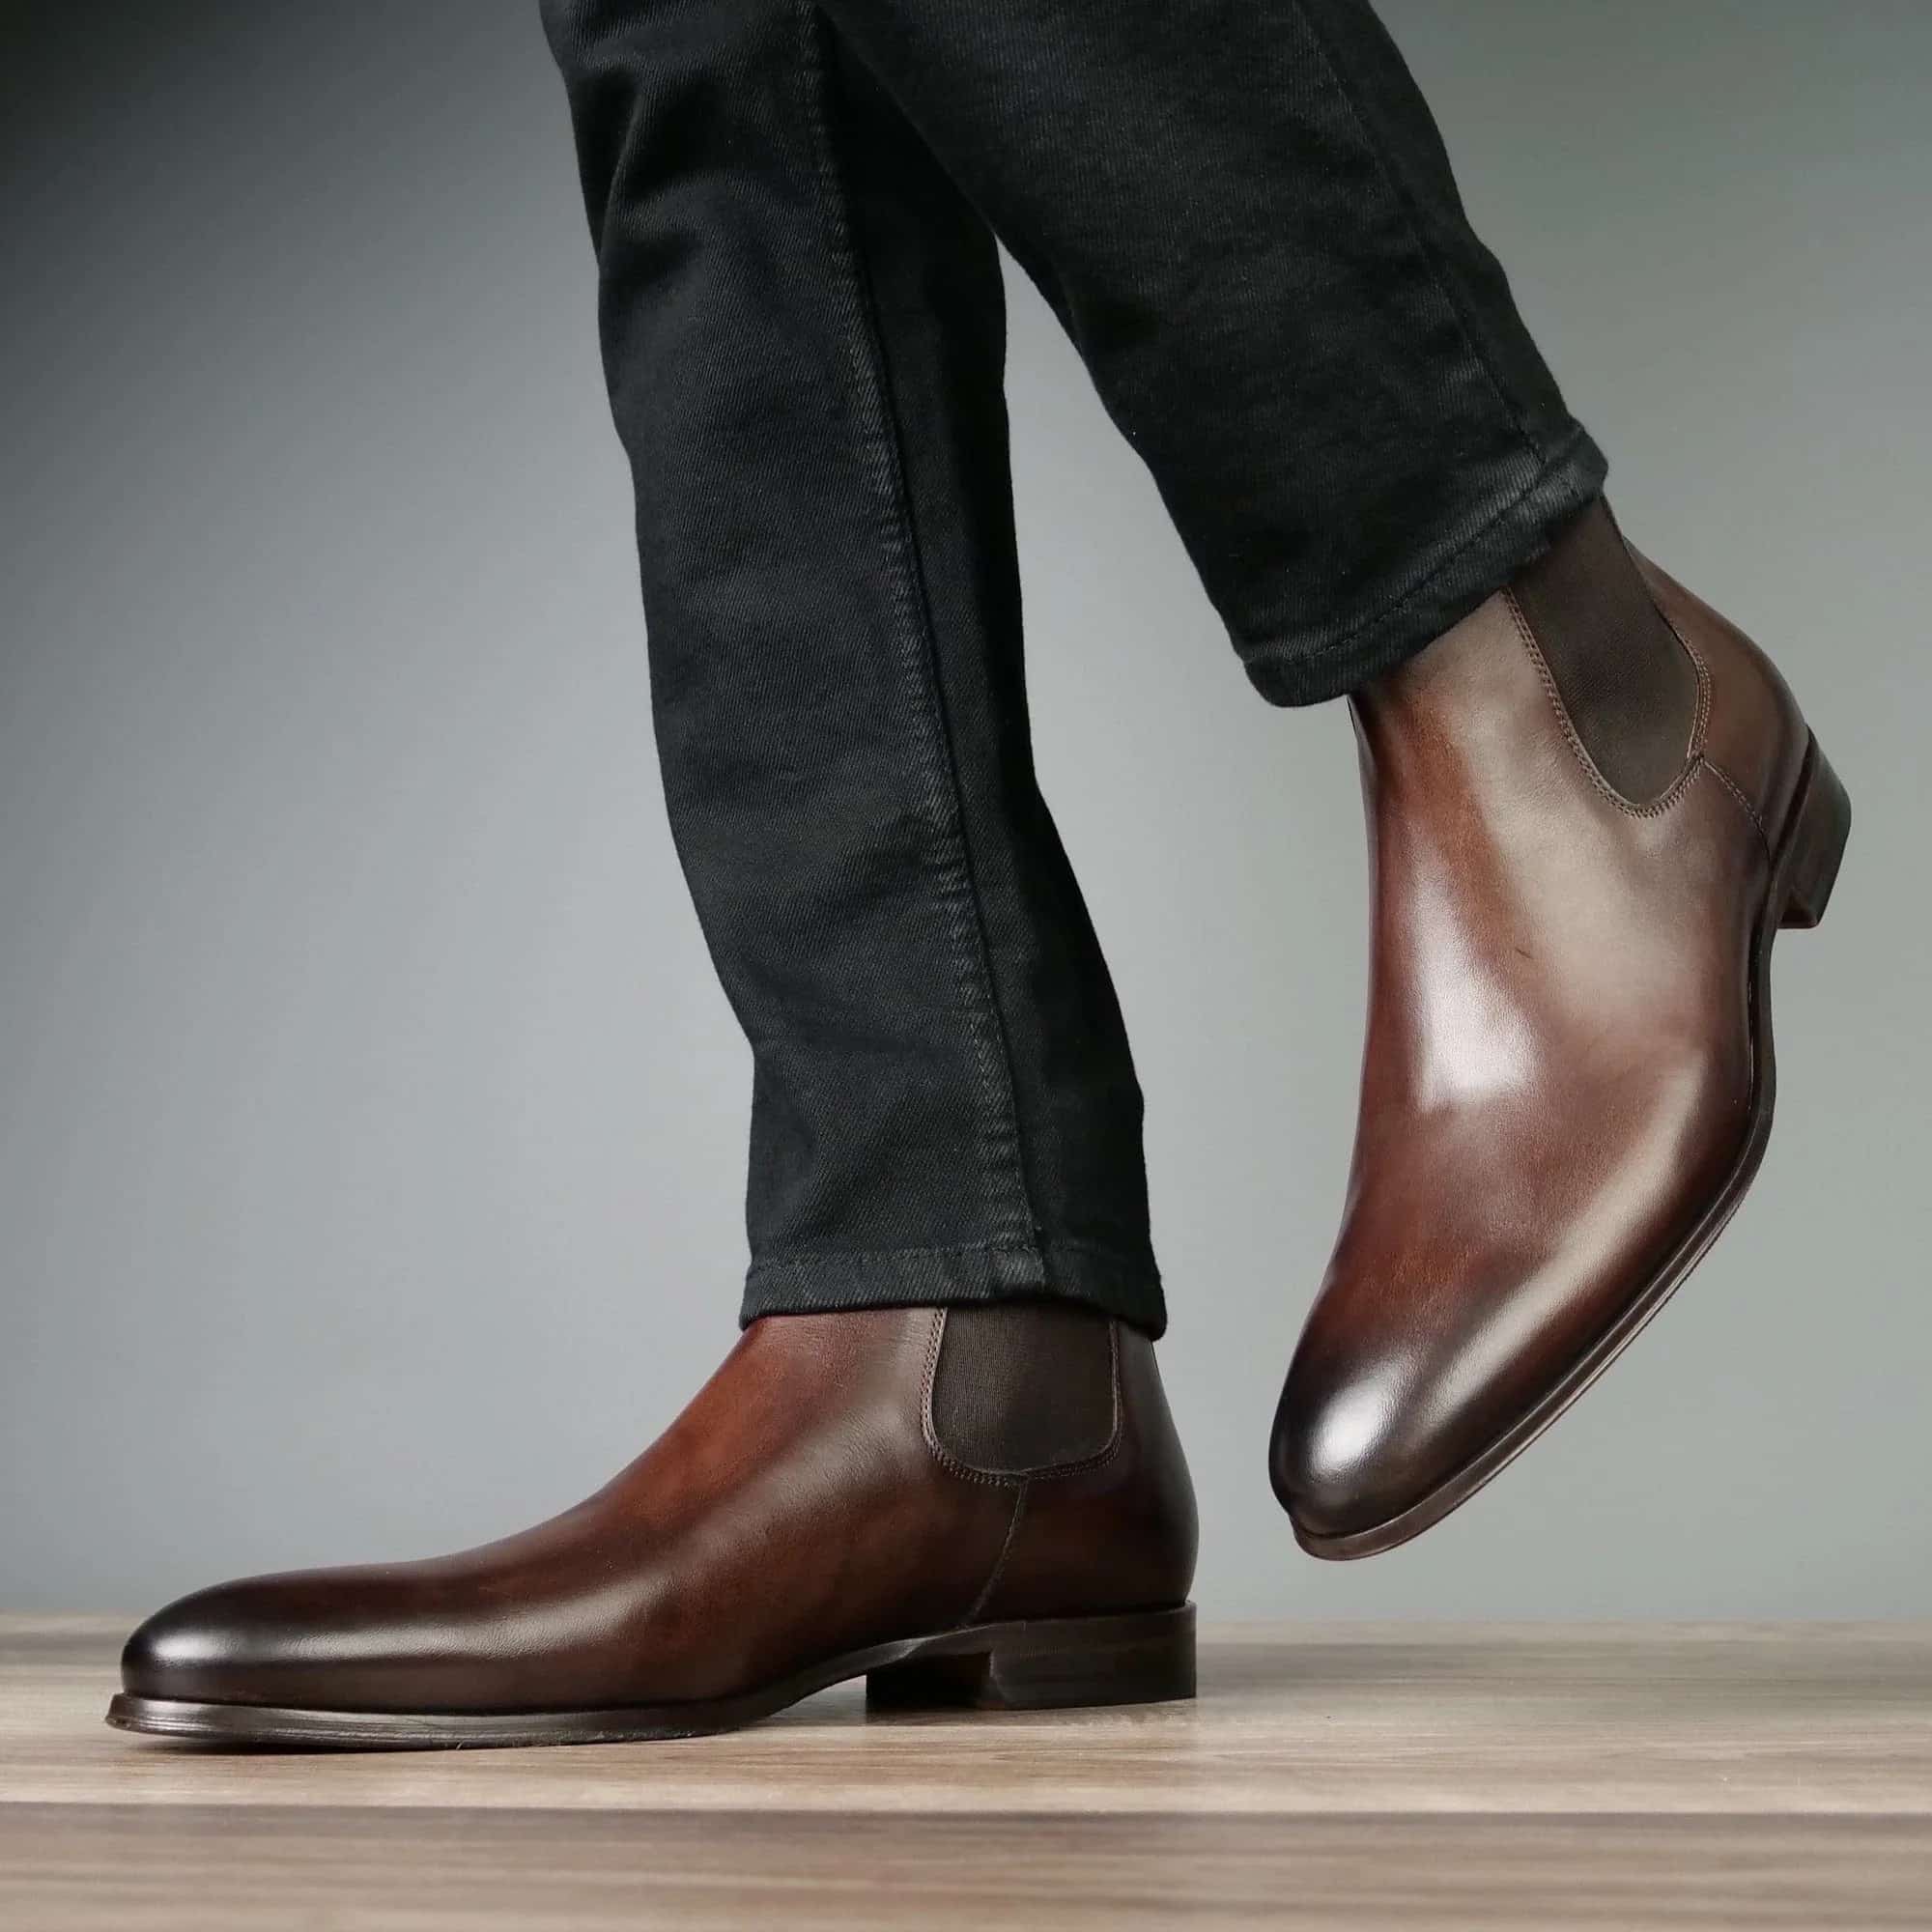 Black Pants Brown Shoes: A Style Guide to Elevate Your Wardrobe